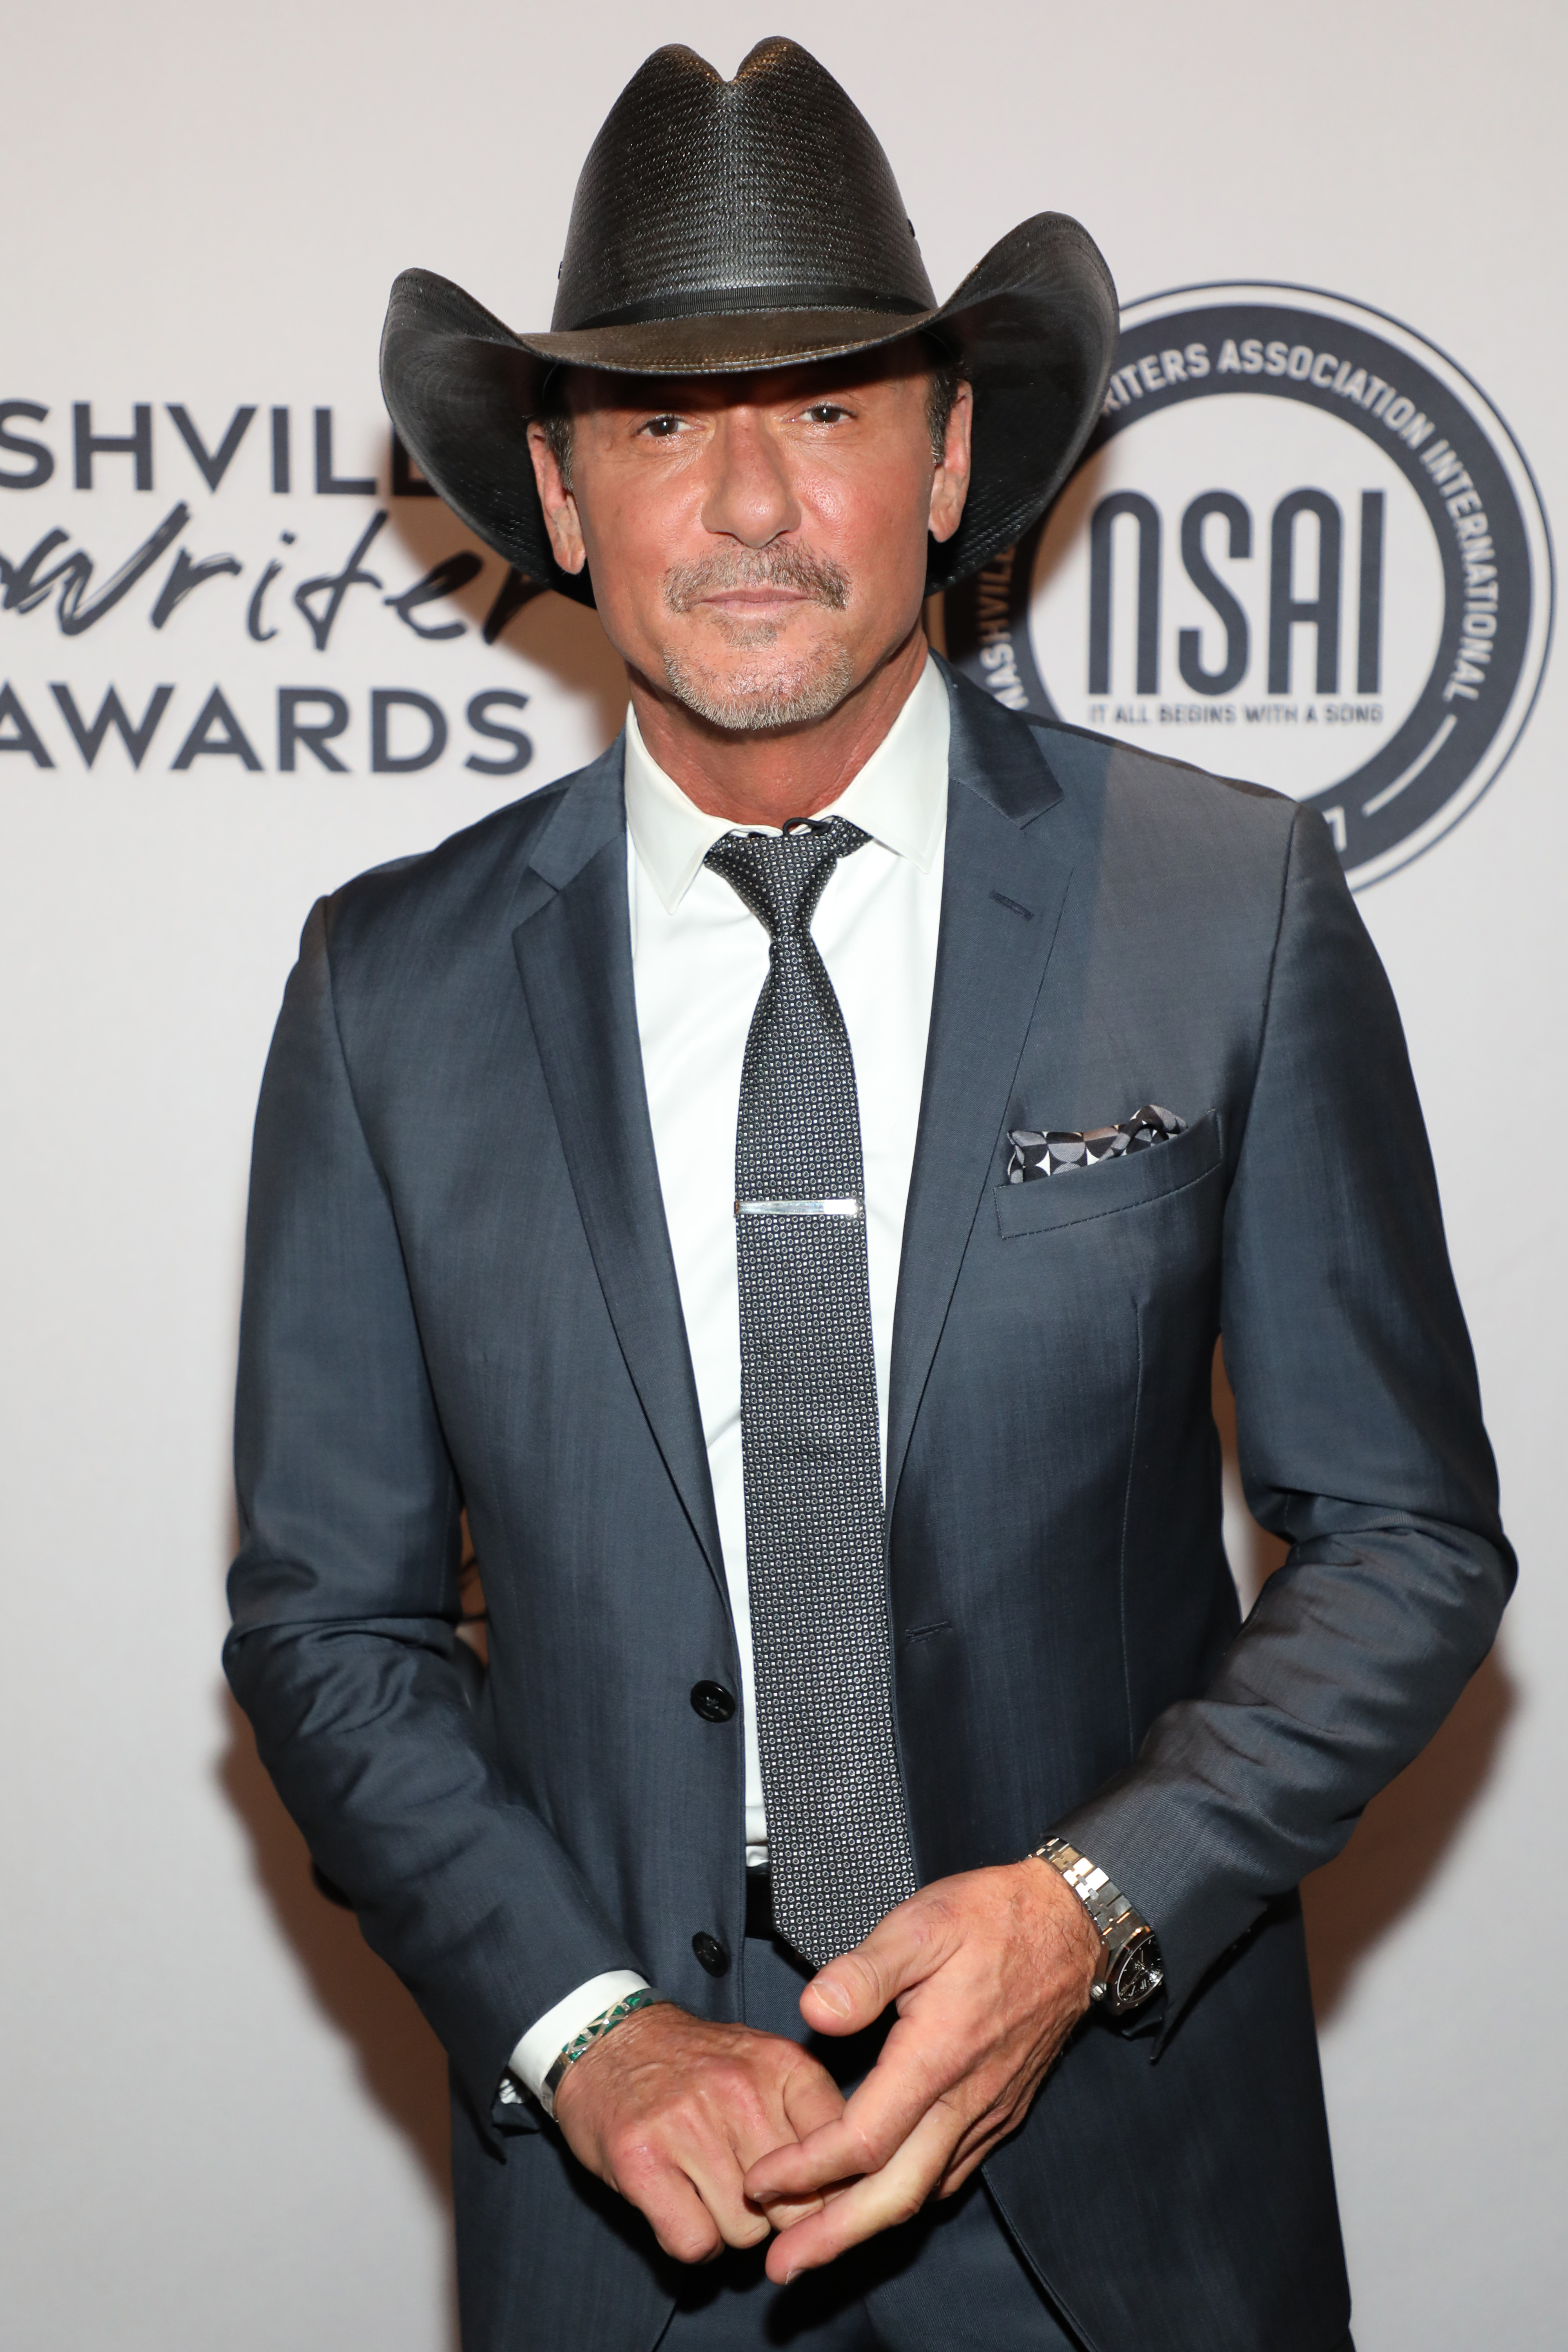 Tim in a Western-style hat and suit and tie at a media event